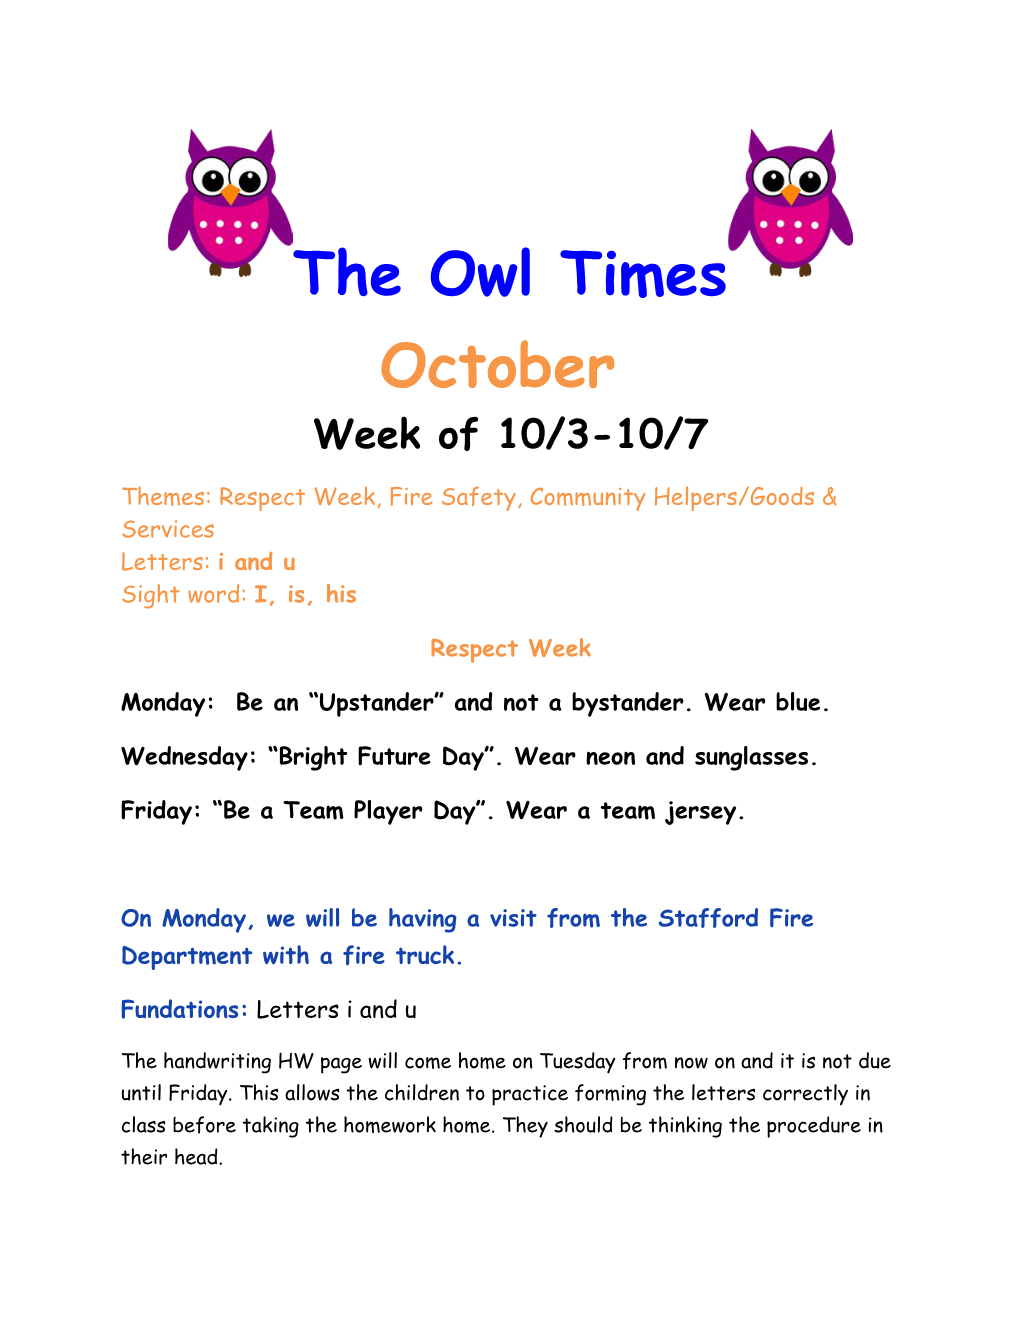 Themes: Respect Week, Fire Safety, Community Helpers/Goods & Services